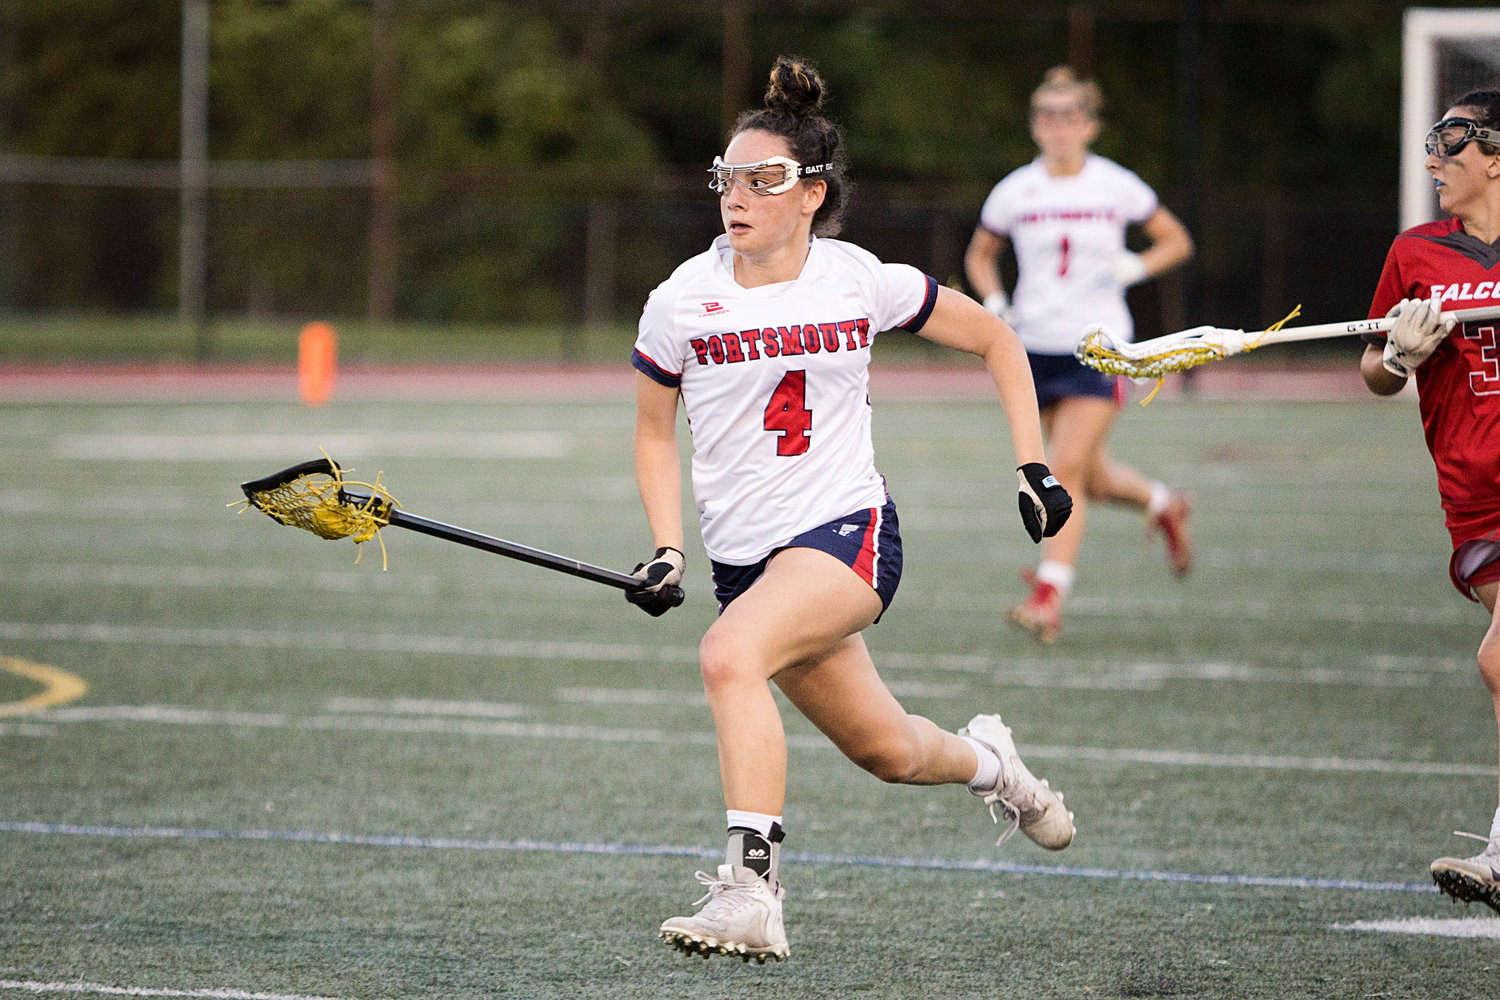 Ellie Skeels makes a break for the net late in the second half of the Division II semifinals, Tuesday. She scored the last six goals of the game — the decisive factor in the Patriots’ improbable comeback.